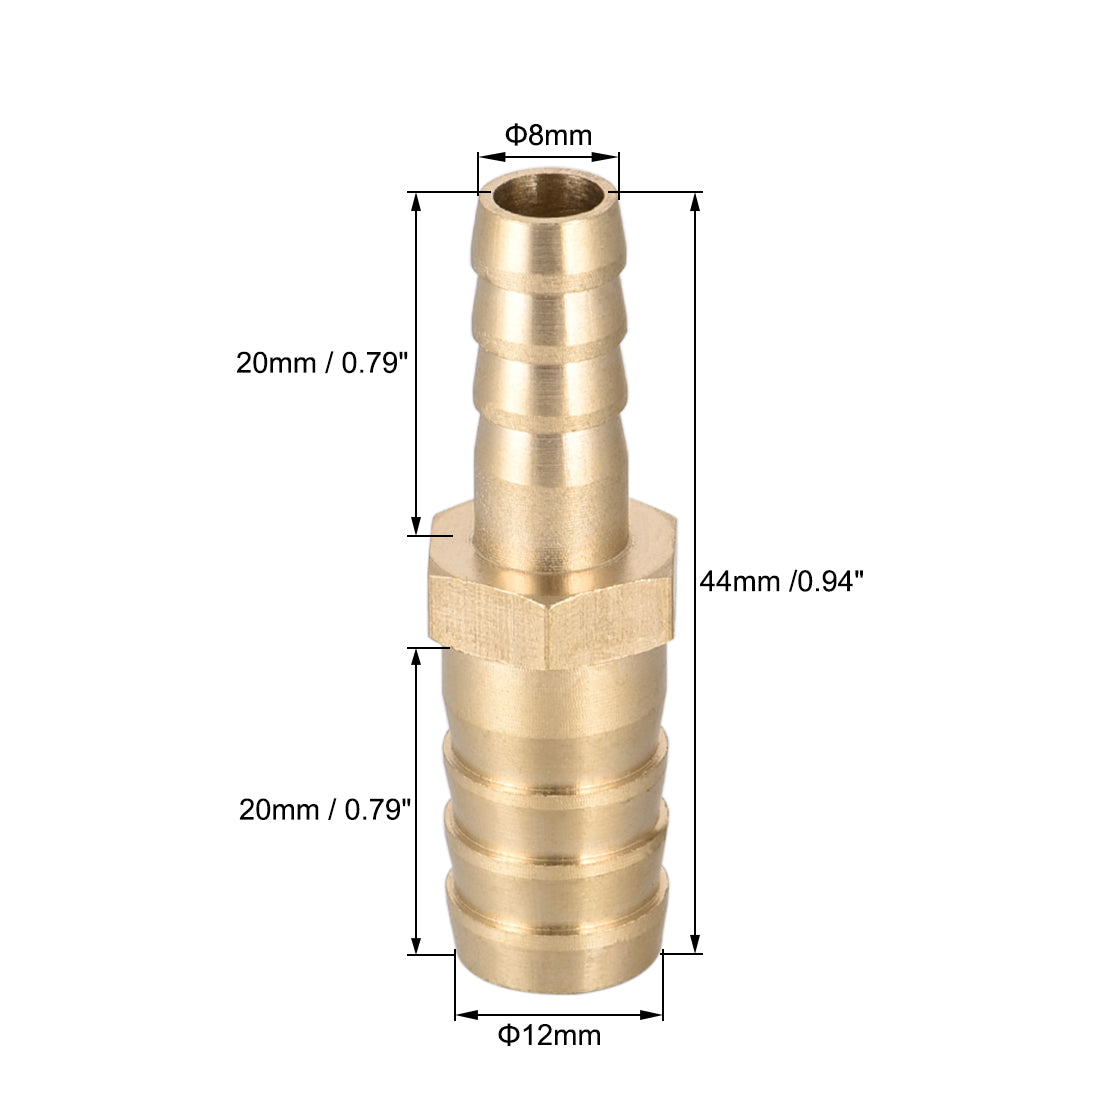 Uxcell Uxcell Straight Brass Barb Fitting Reducer, Fit Hose ID 21mm to 15mm